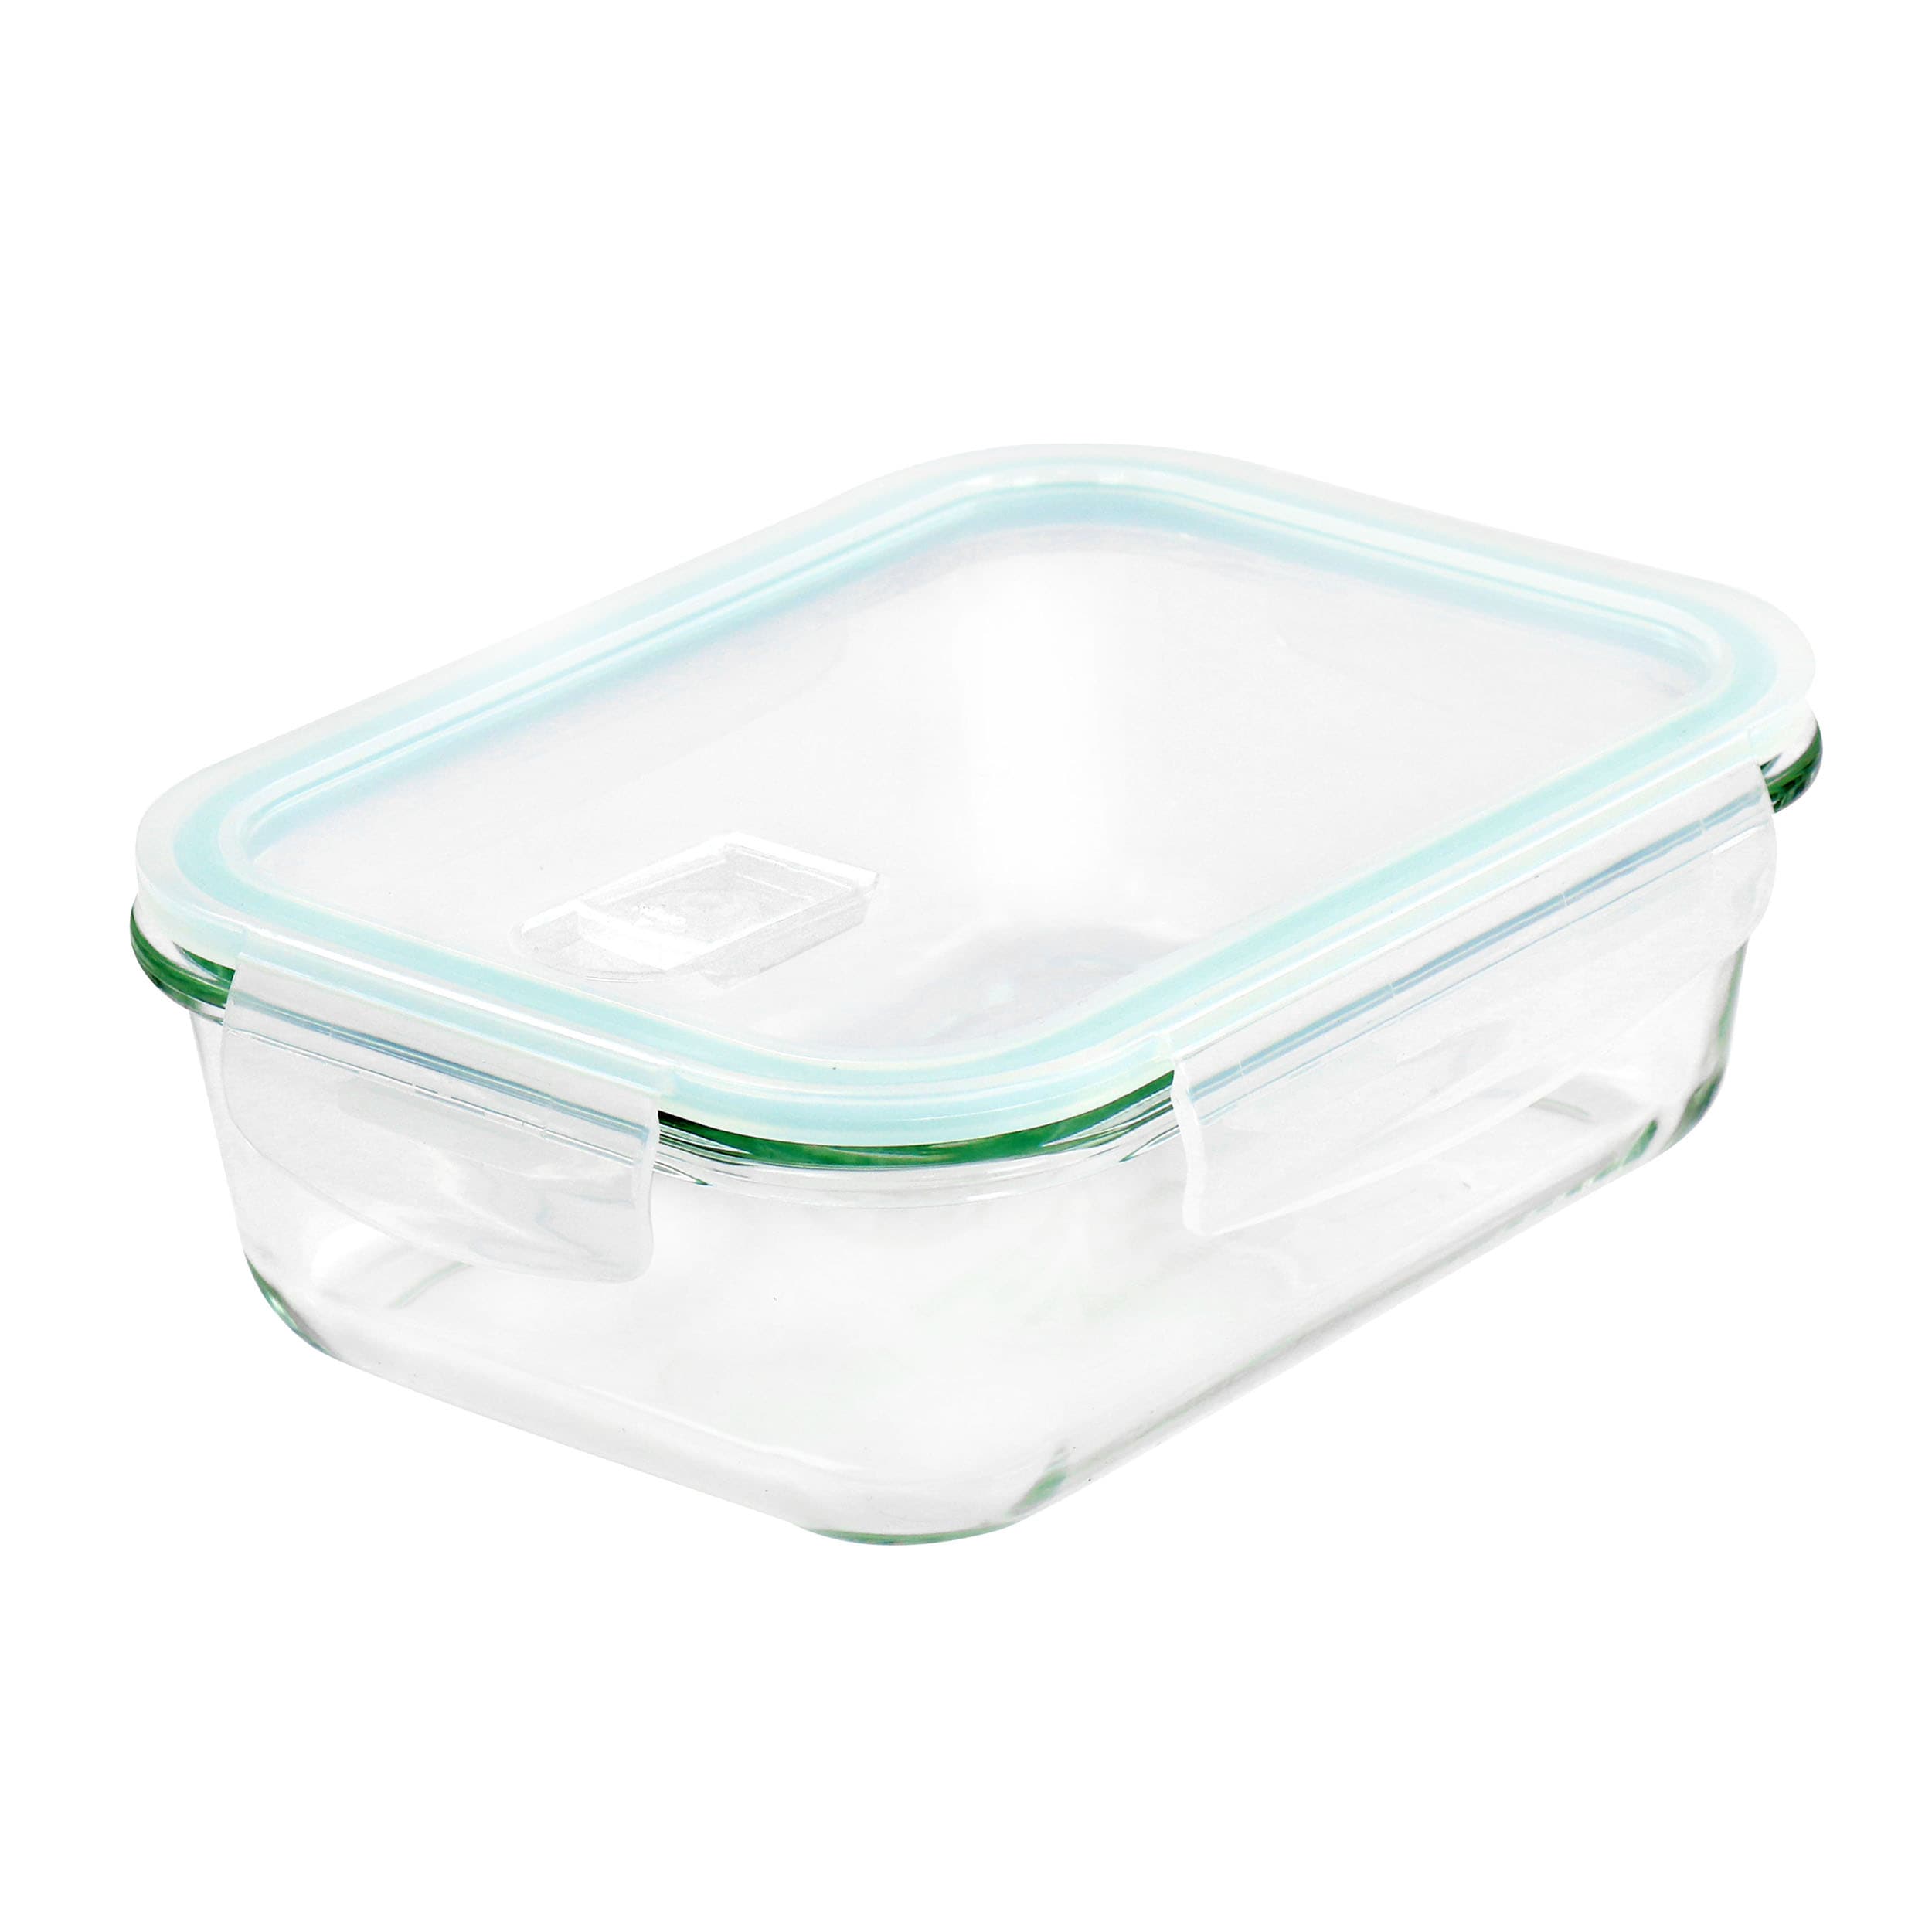 12-Pack Glass Meal Prep Containers, Glass Food Storage Containers with Locking Lids - Microwave, Oven and Freezer Friendly, Size: (1)35.5 oz, (1)22 oz